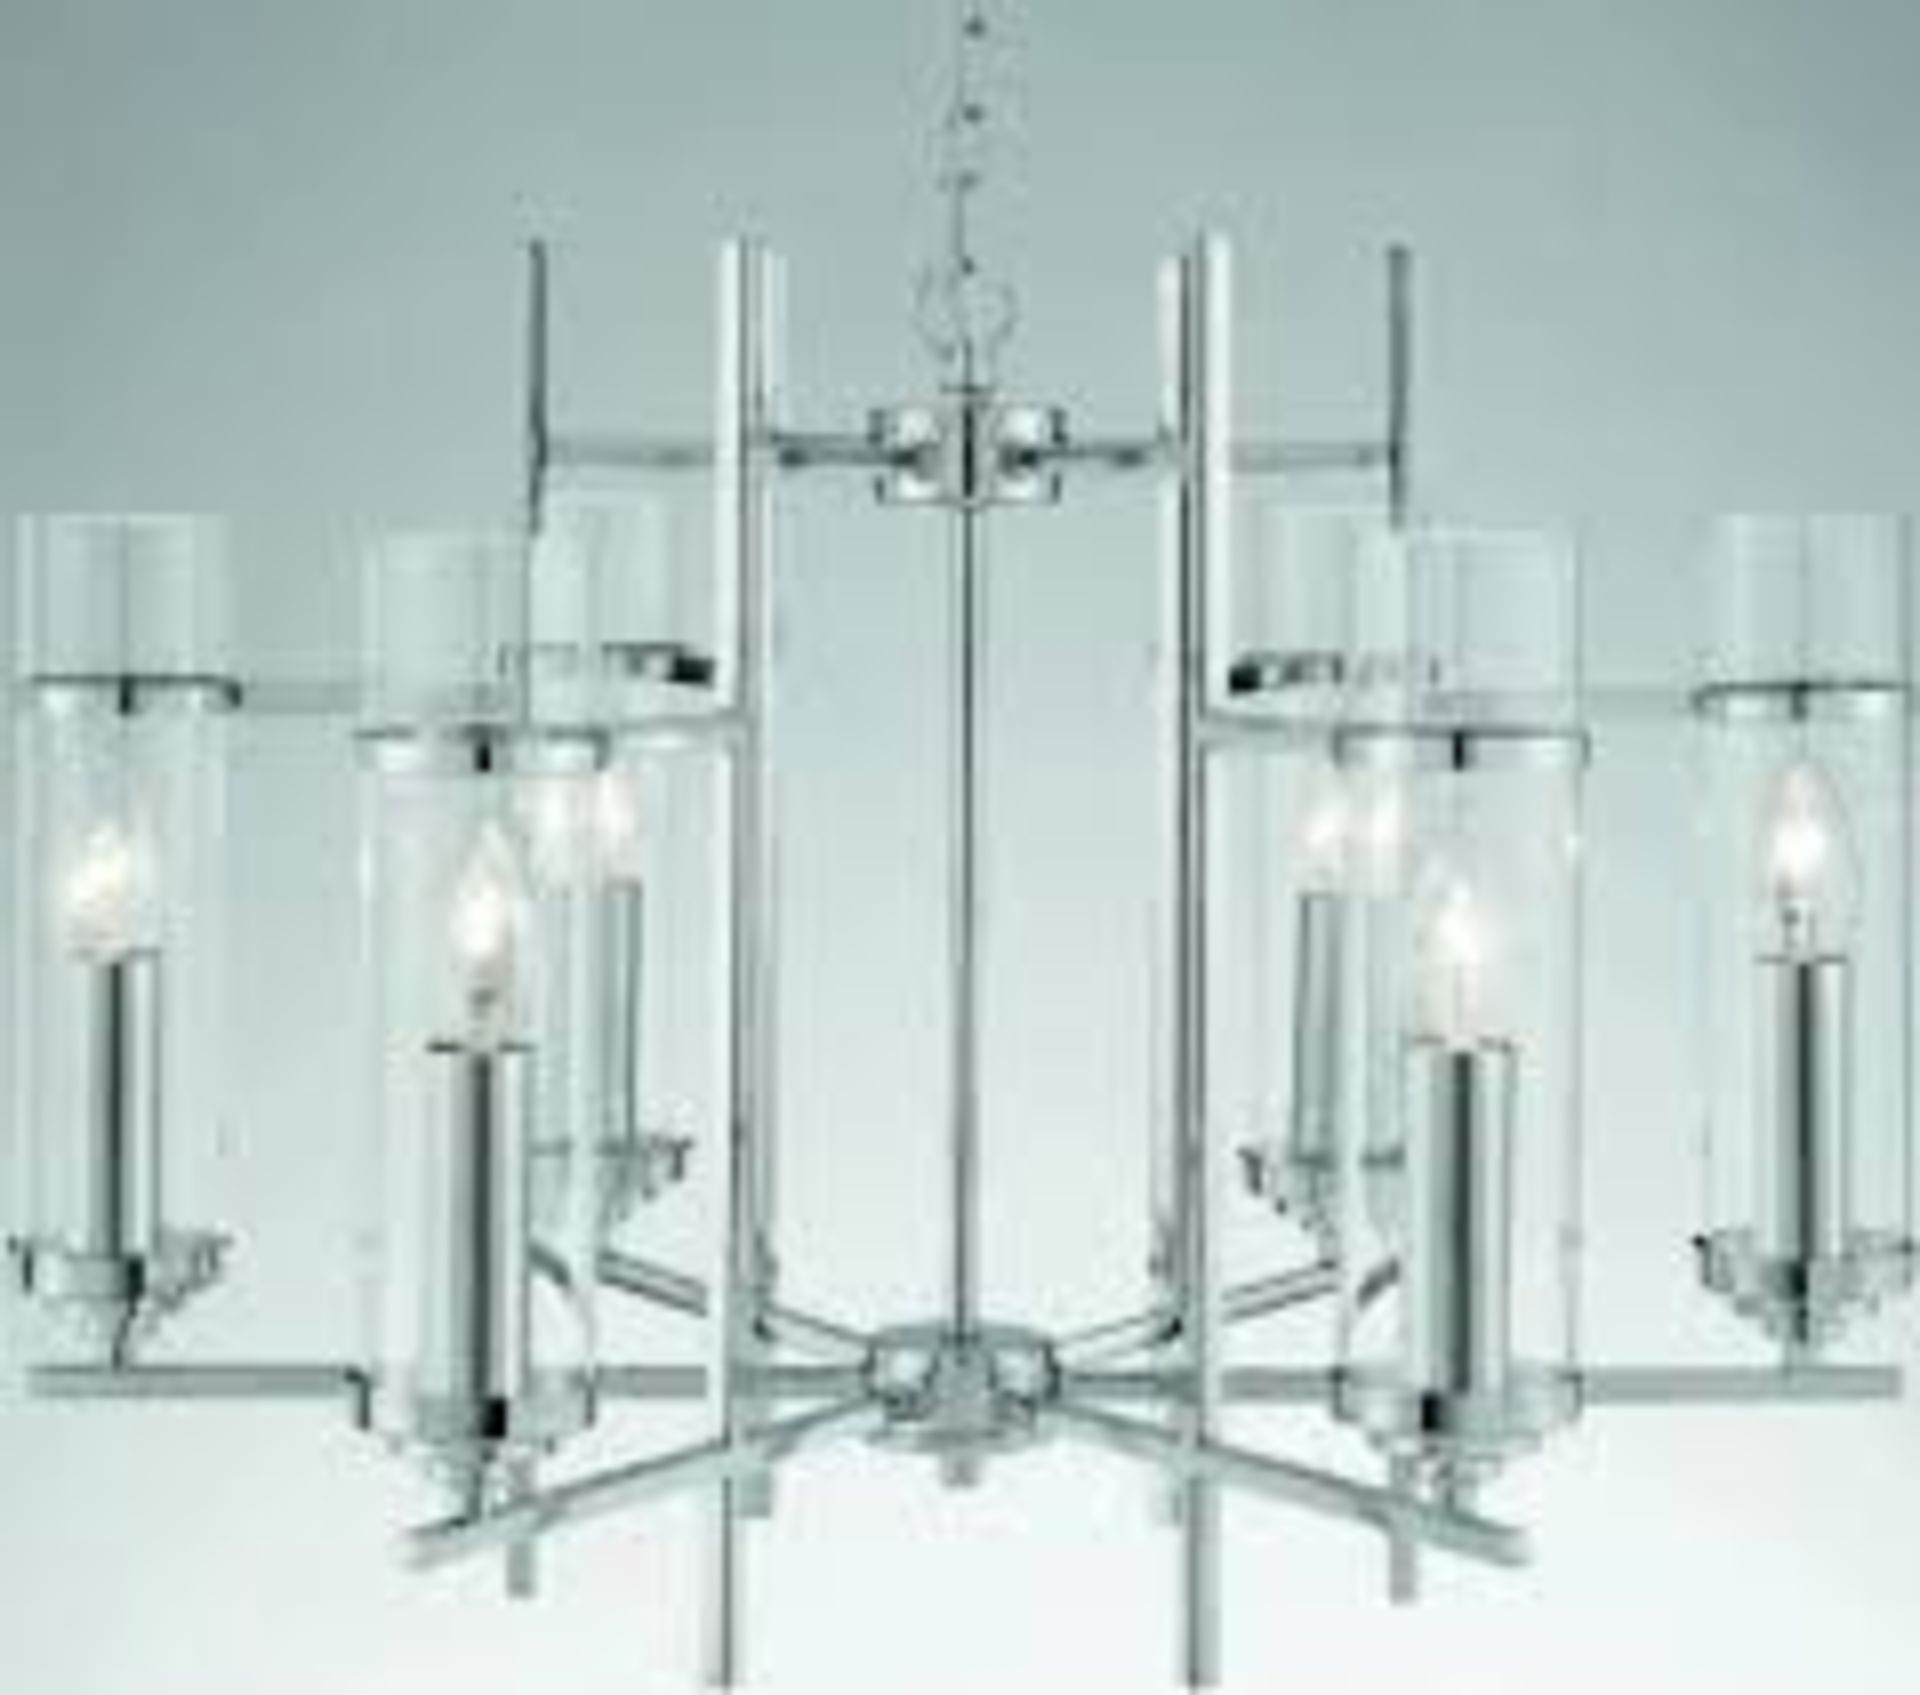 1 x Searchlight Milo 6 Light Ceiling Light Polished Chrome - Ex Display Stock - CL298 - Product Code - Image 4 of 4